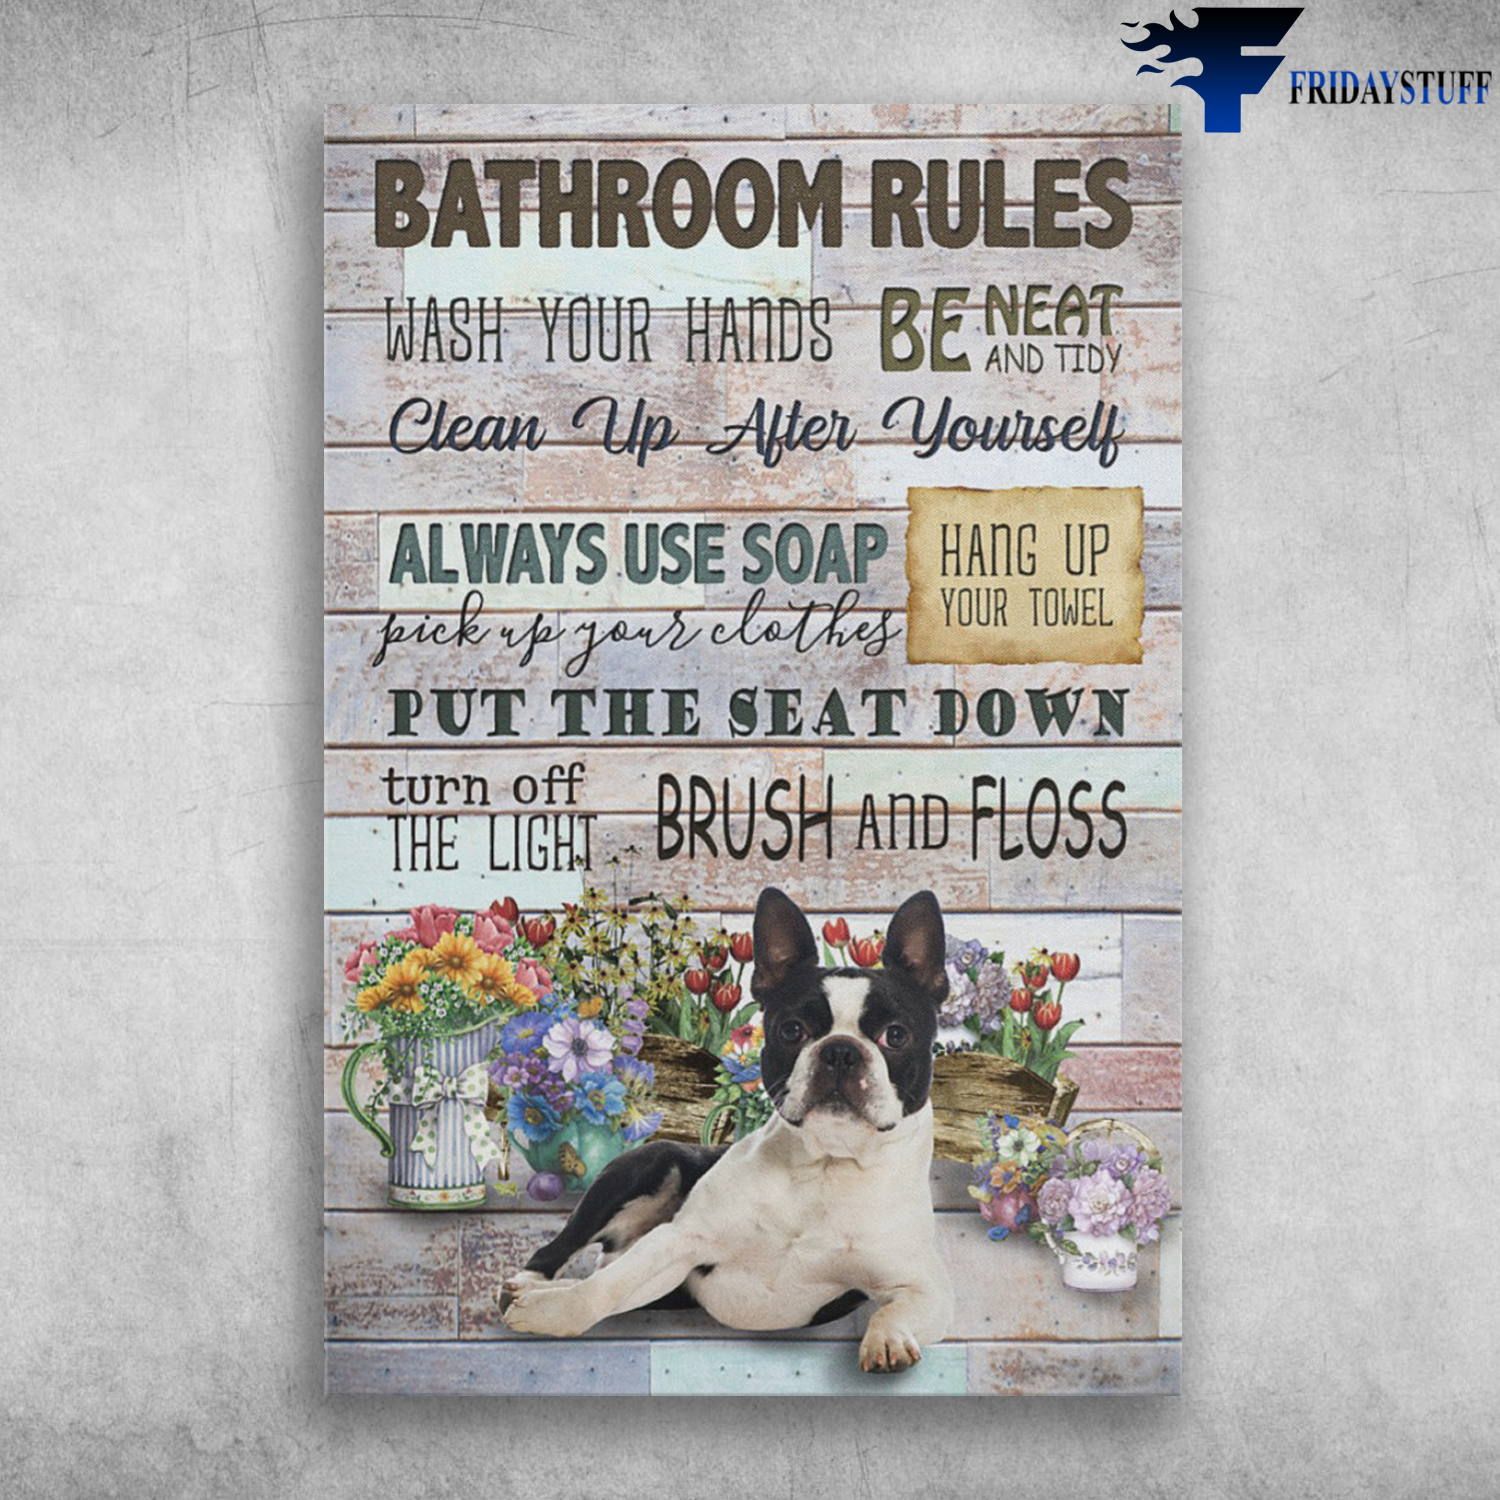 Boston Terrier - Bathroom Rules, Wash Your Hands, Clean Up After Yourself Be Near And Tidy, Always Use Soap, Pick Up Your Clothes, Hang Up Your Towel, Put The Seat Down, Turn Off The Light, Brush And Floss